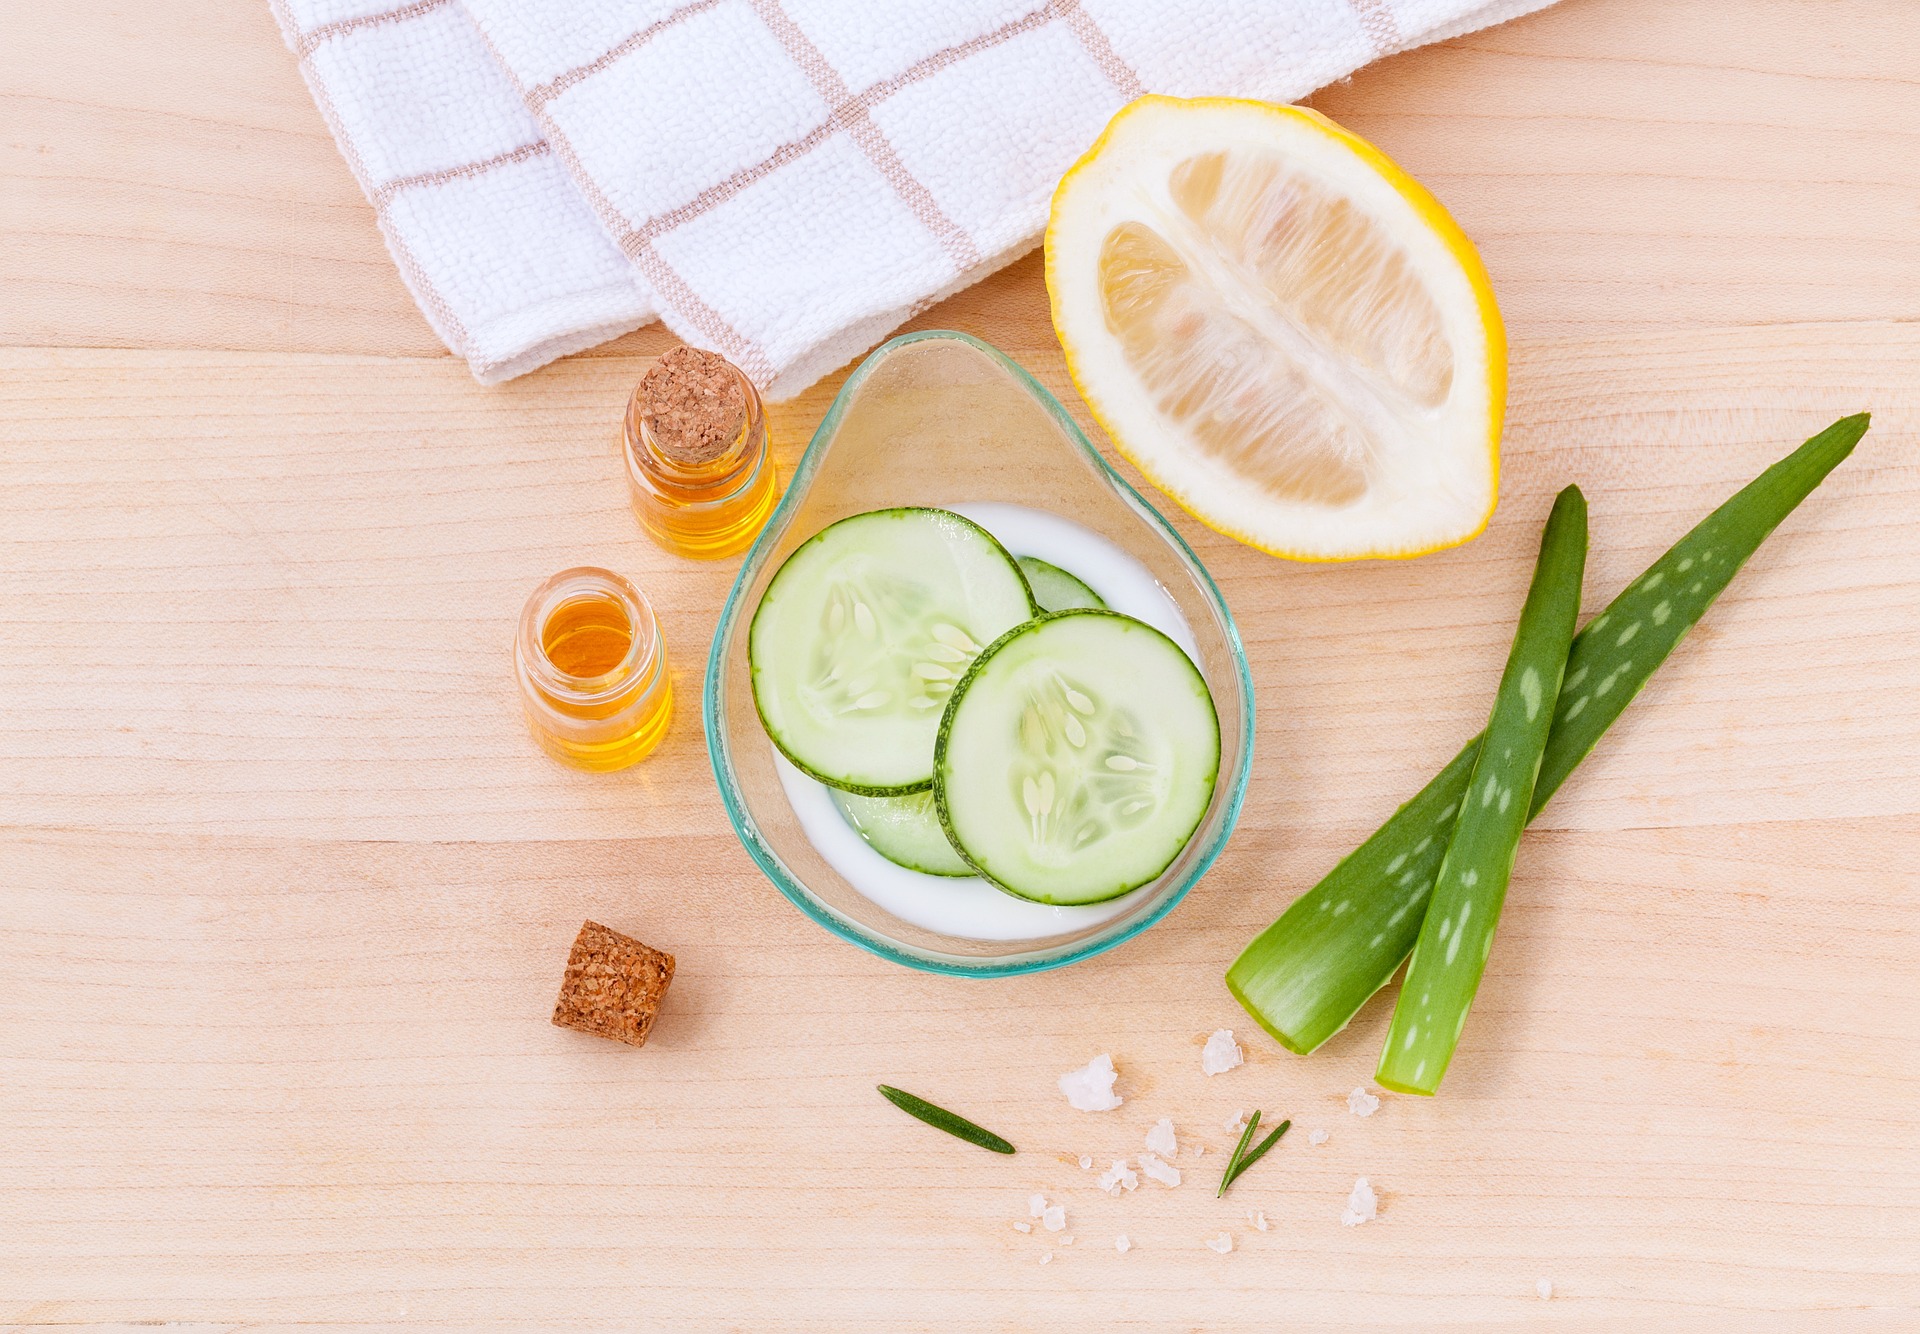 Home remedies for wrinkles